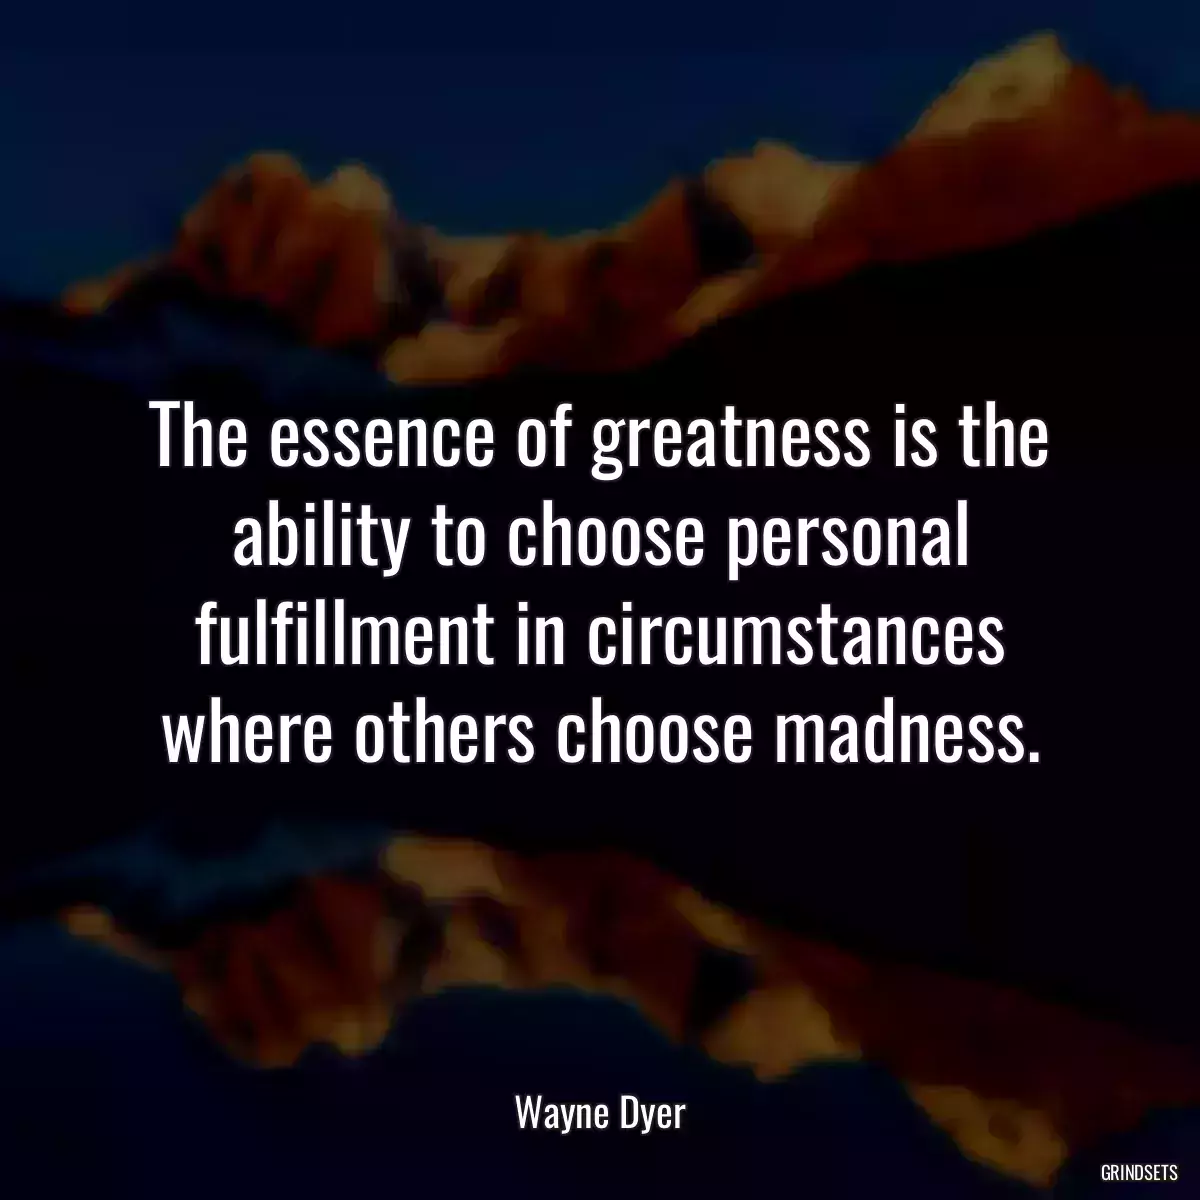 The essence of greatness is the ability to choose personal fulfillment in circumstances where others choose madness.